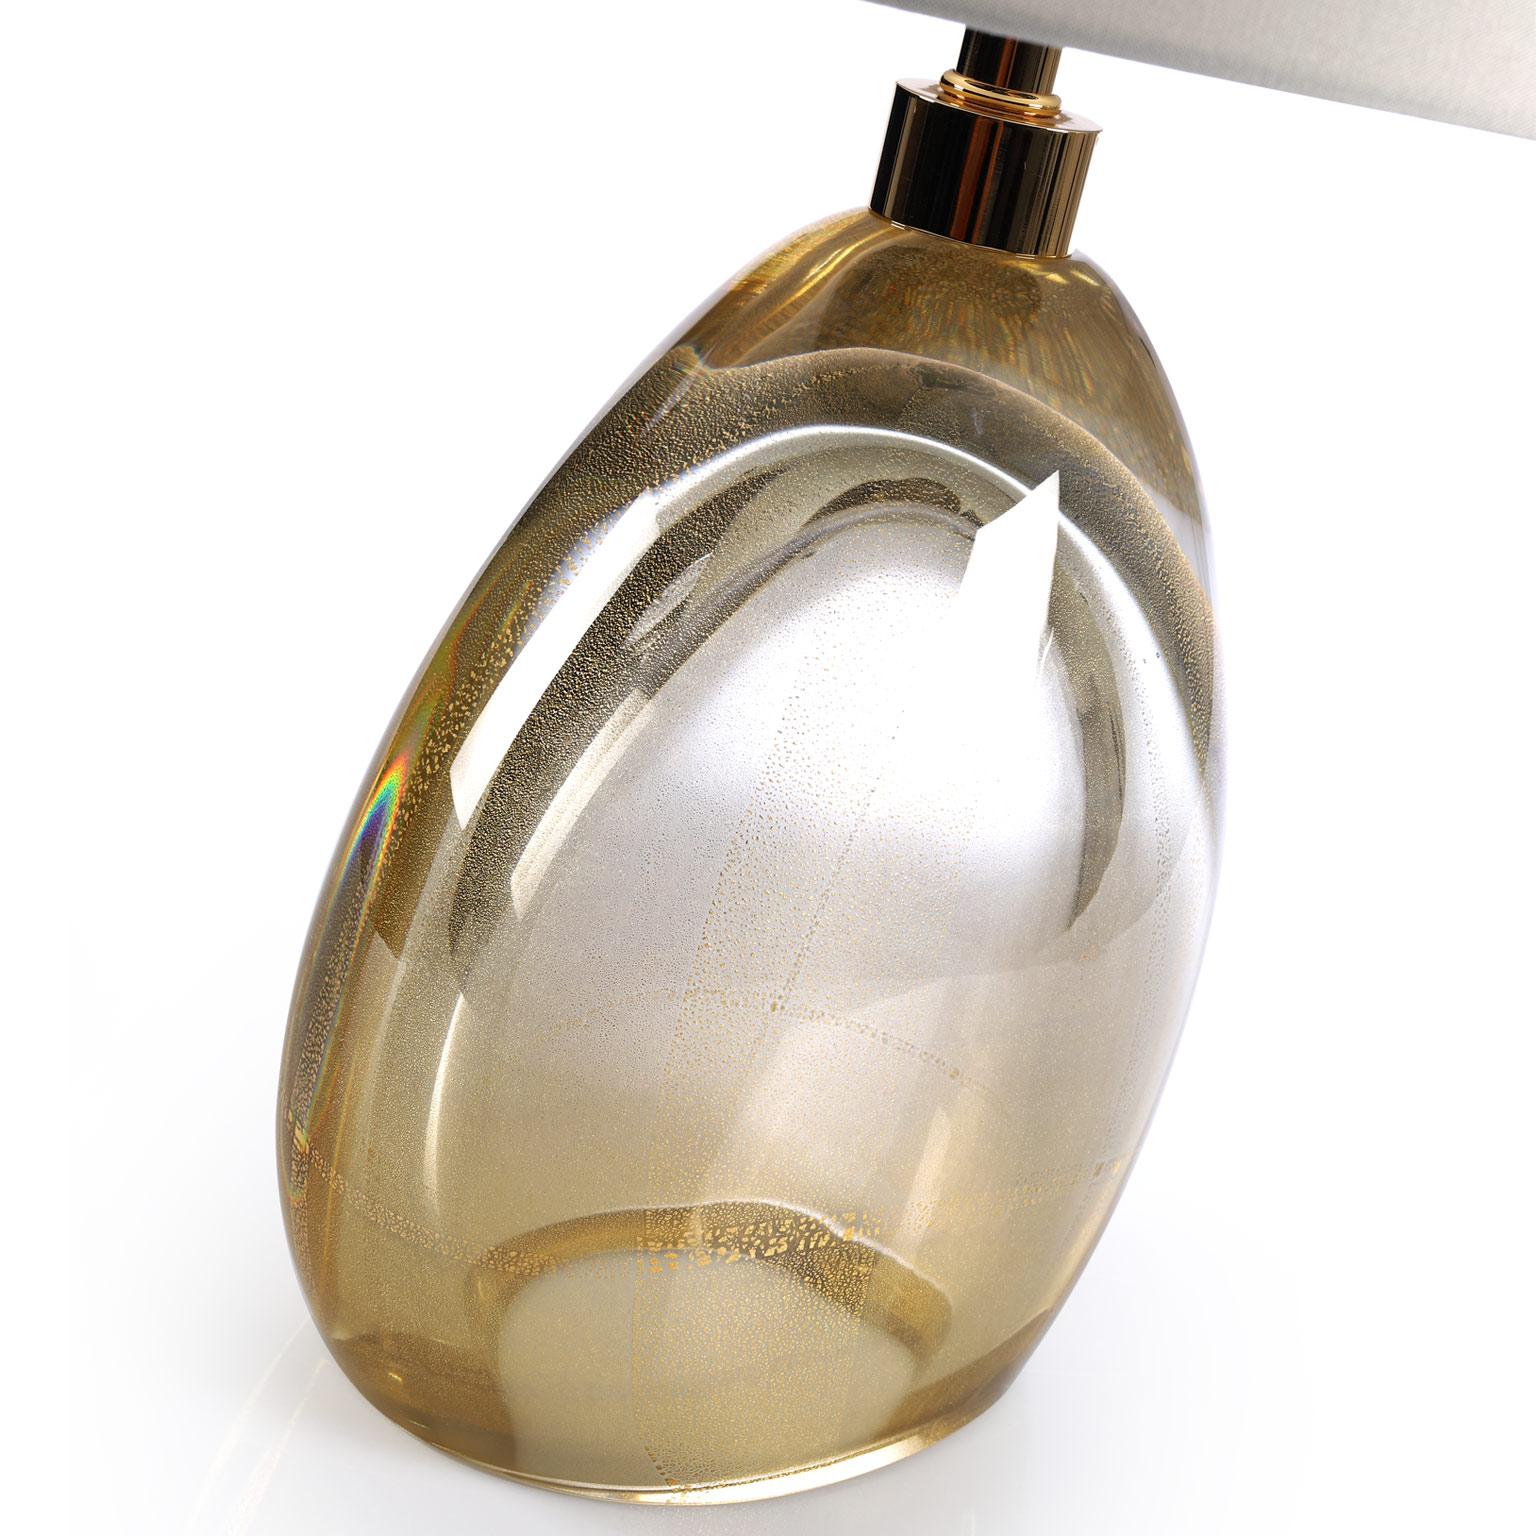 Gold Sommerso Murano glass table lamps by Seguso Vetri d'Arte. Available with black or white shade. Takes two standard light bulbs.